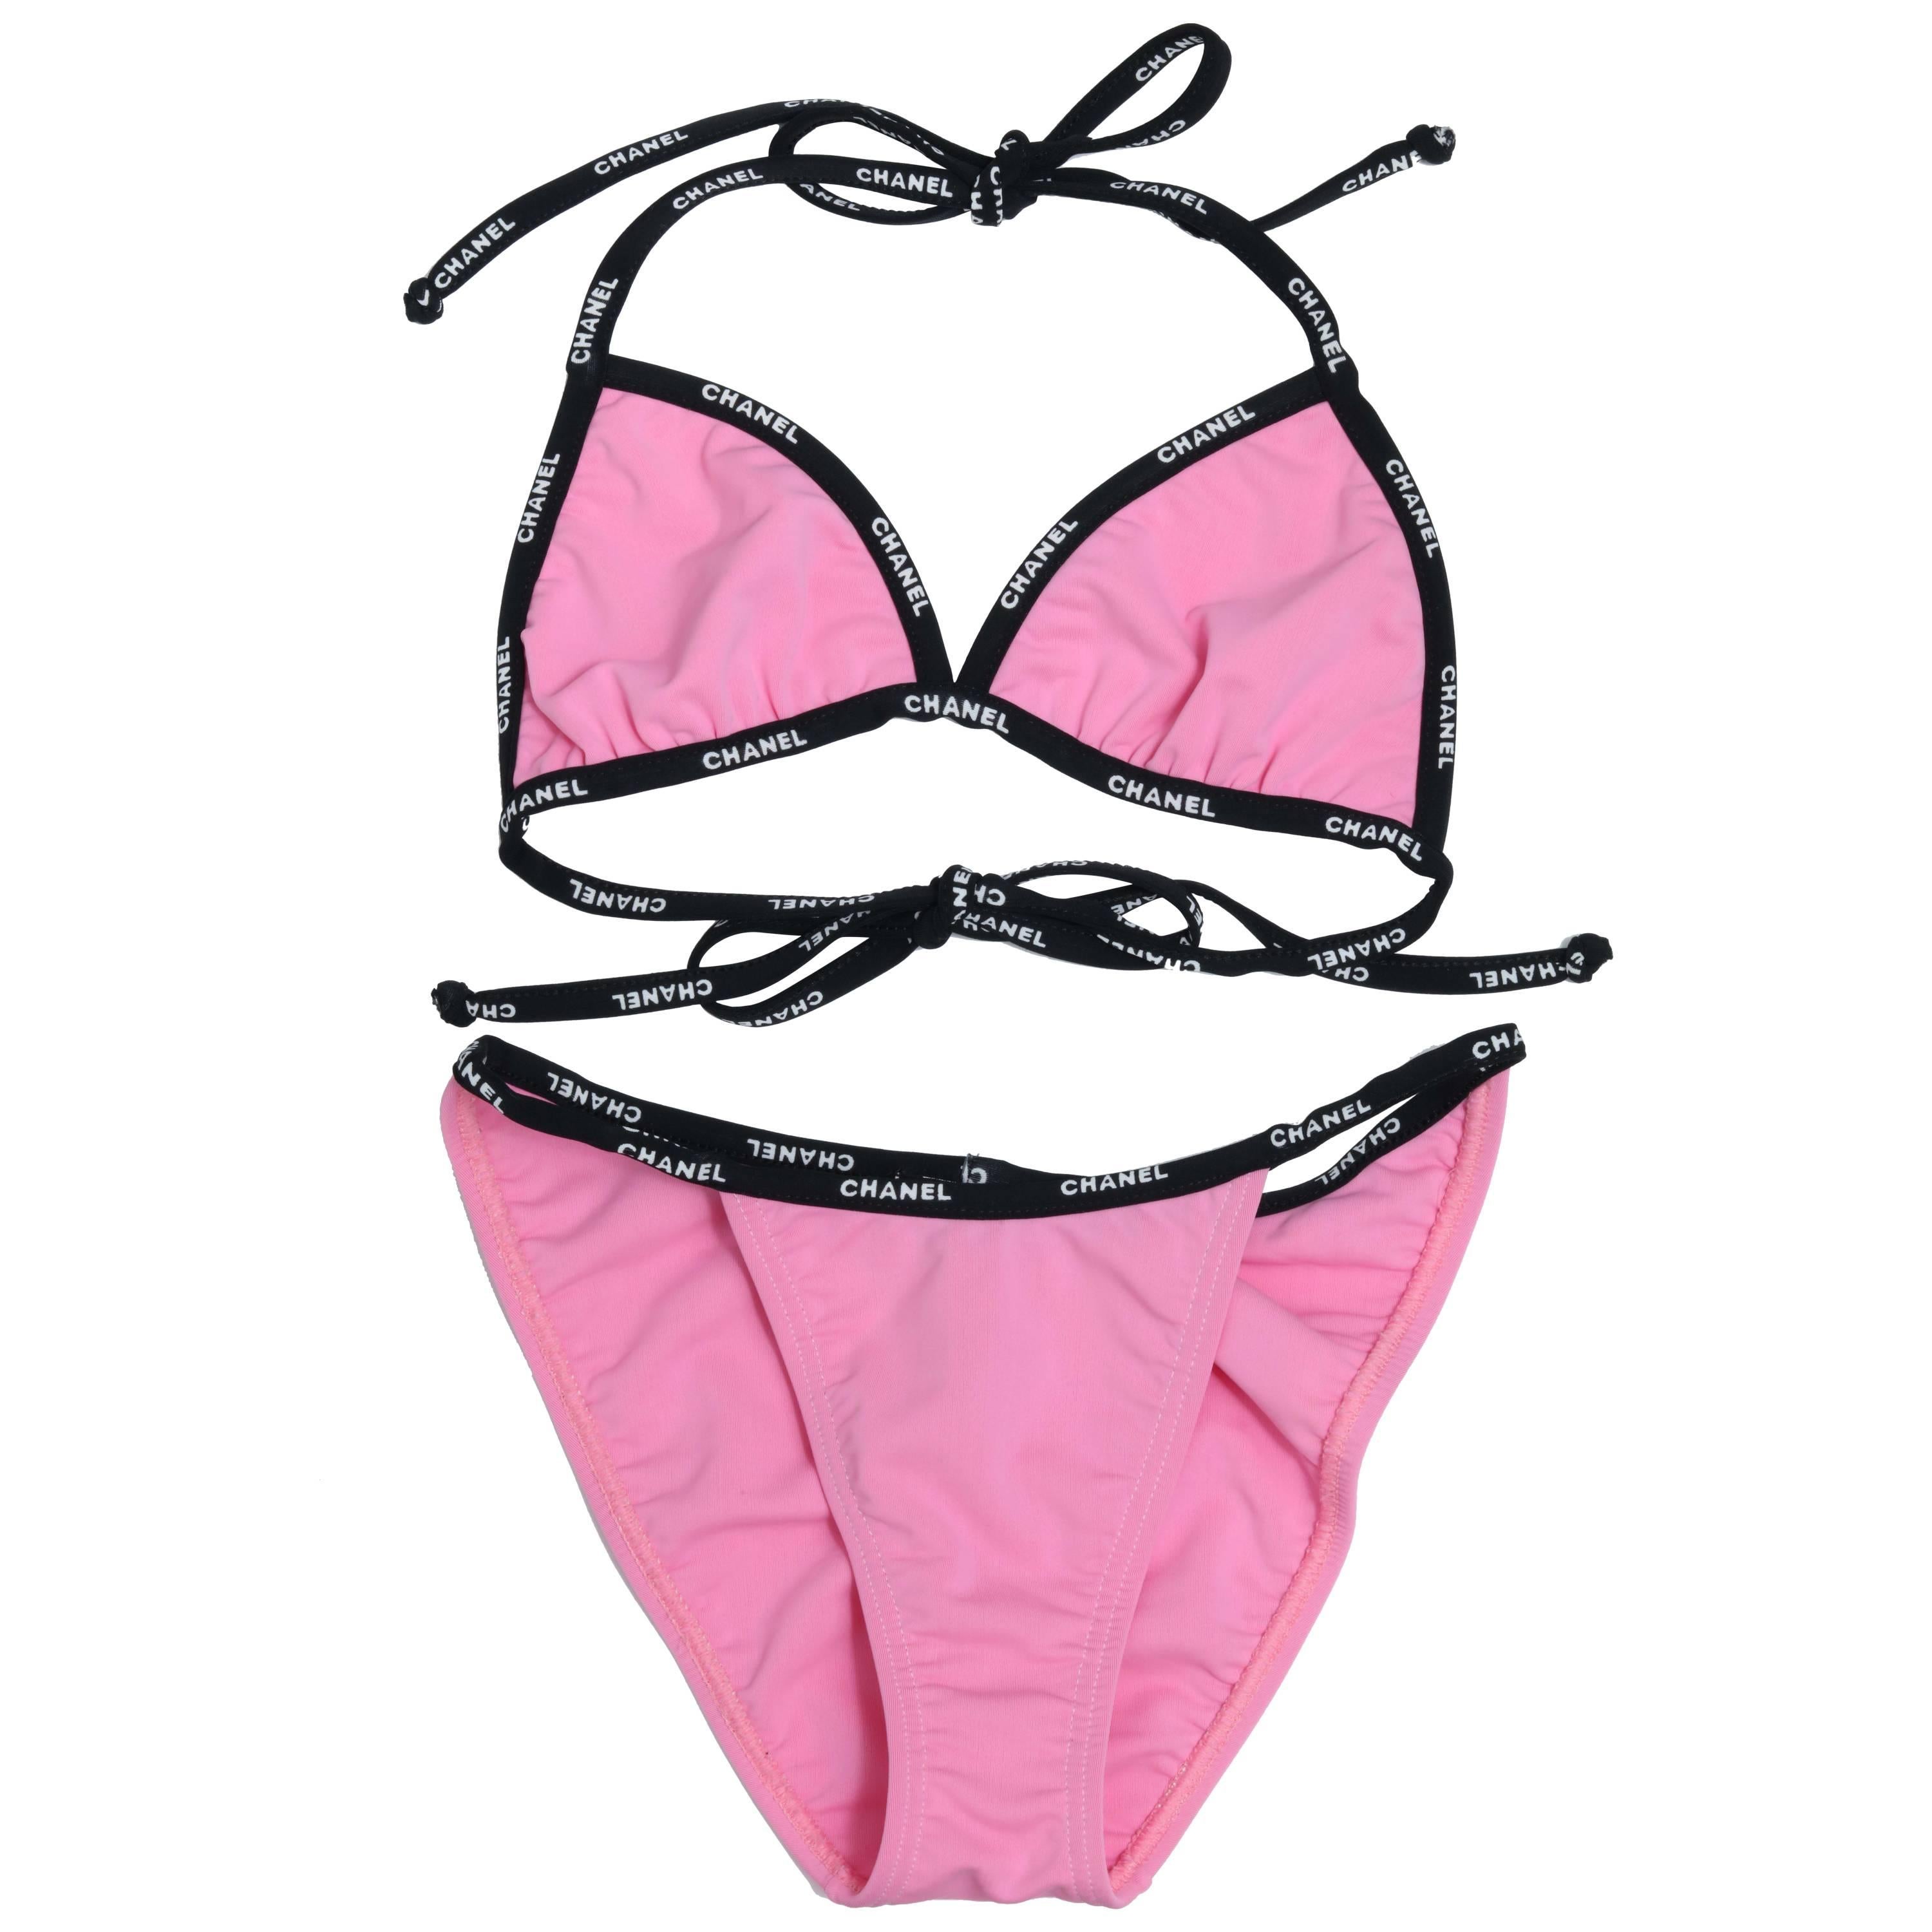  Extremely Rare Chanel Pink Bikini with Logos